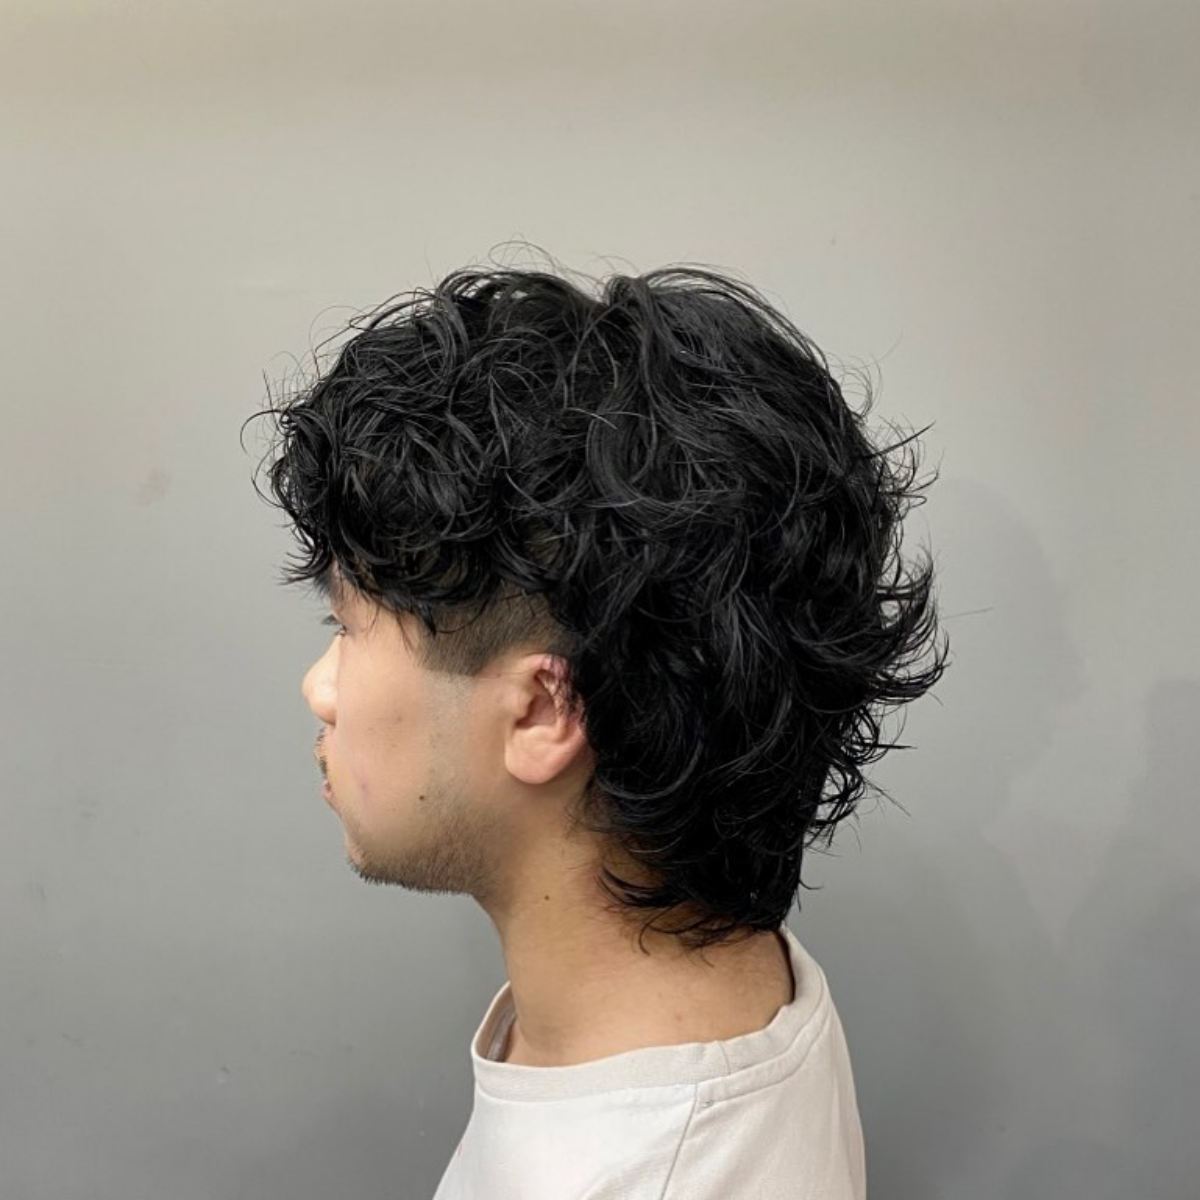 men's hairstyles in the 70s mens perm